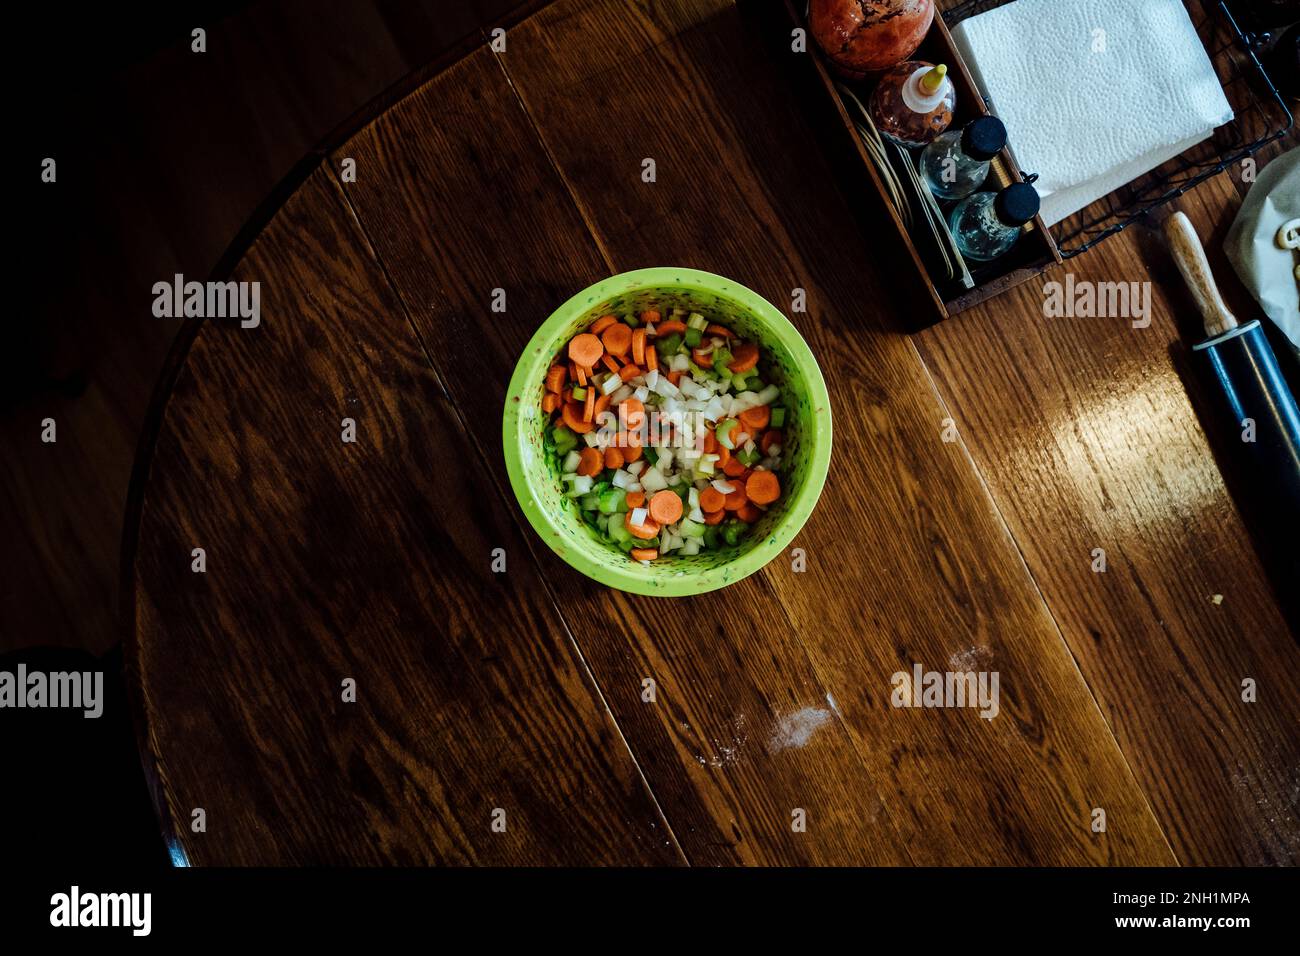 Bright Green Bowl of Chopped Vegetables on Dark Wood Kitchen Table Stock Photo